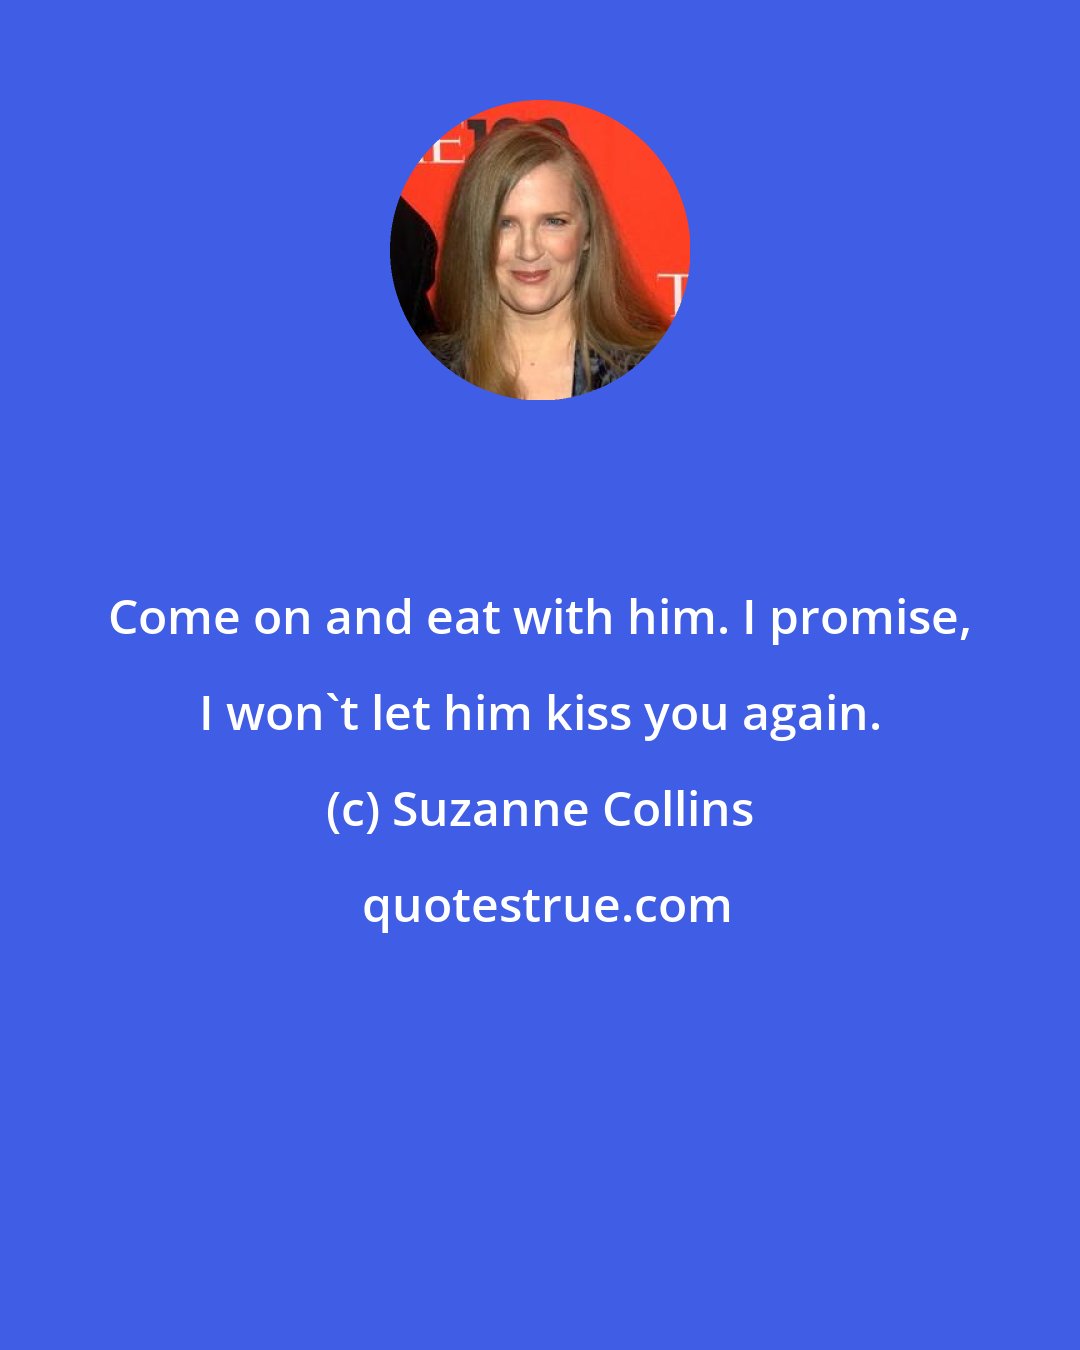 Suzanne Collins: Come on and eat with him. I promise, I won't let him kiss you again.